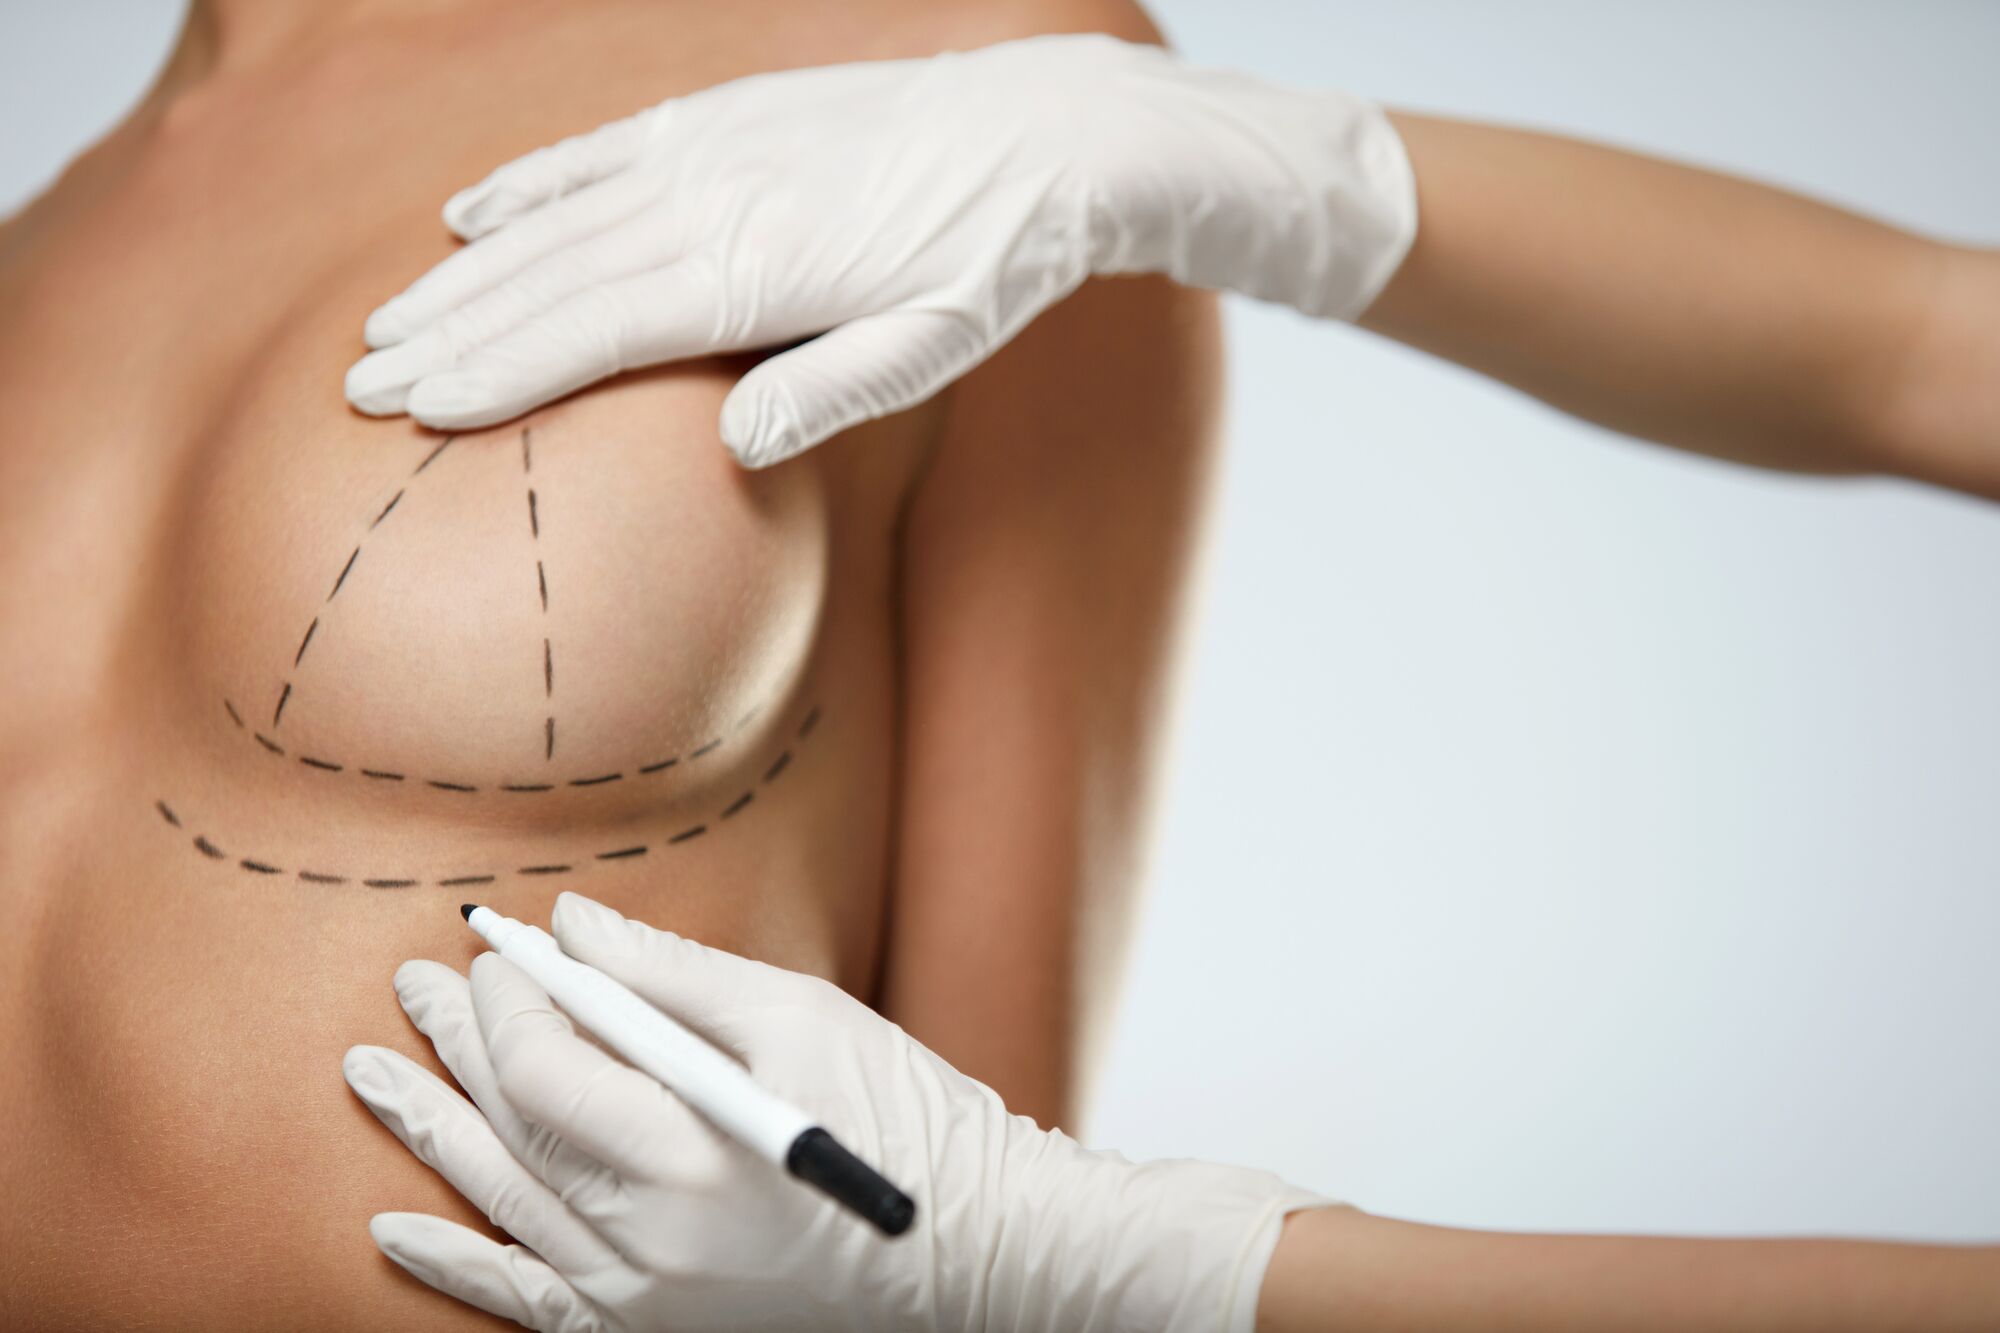 Breast Lift Surgery (Mastopexy): Prep and Recovery